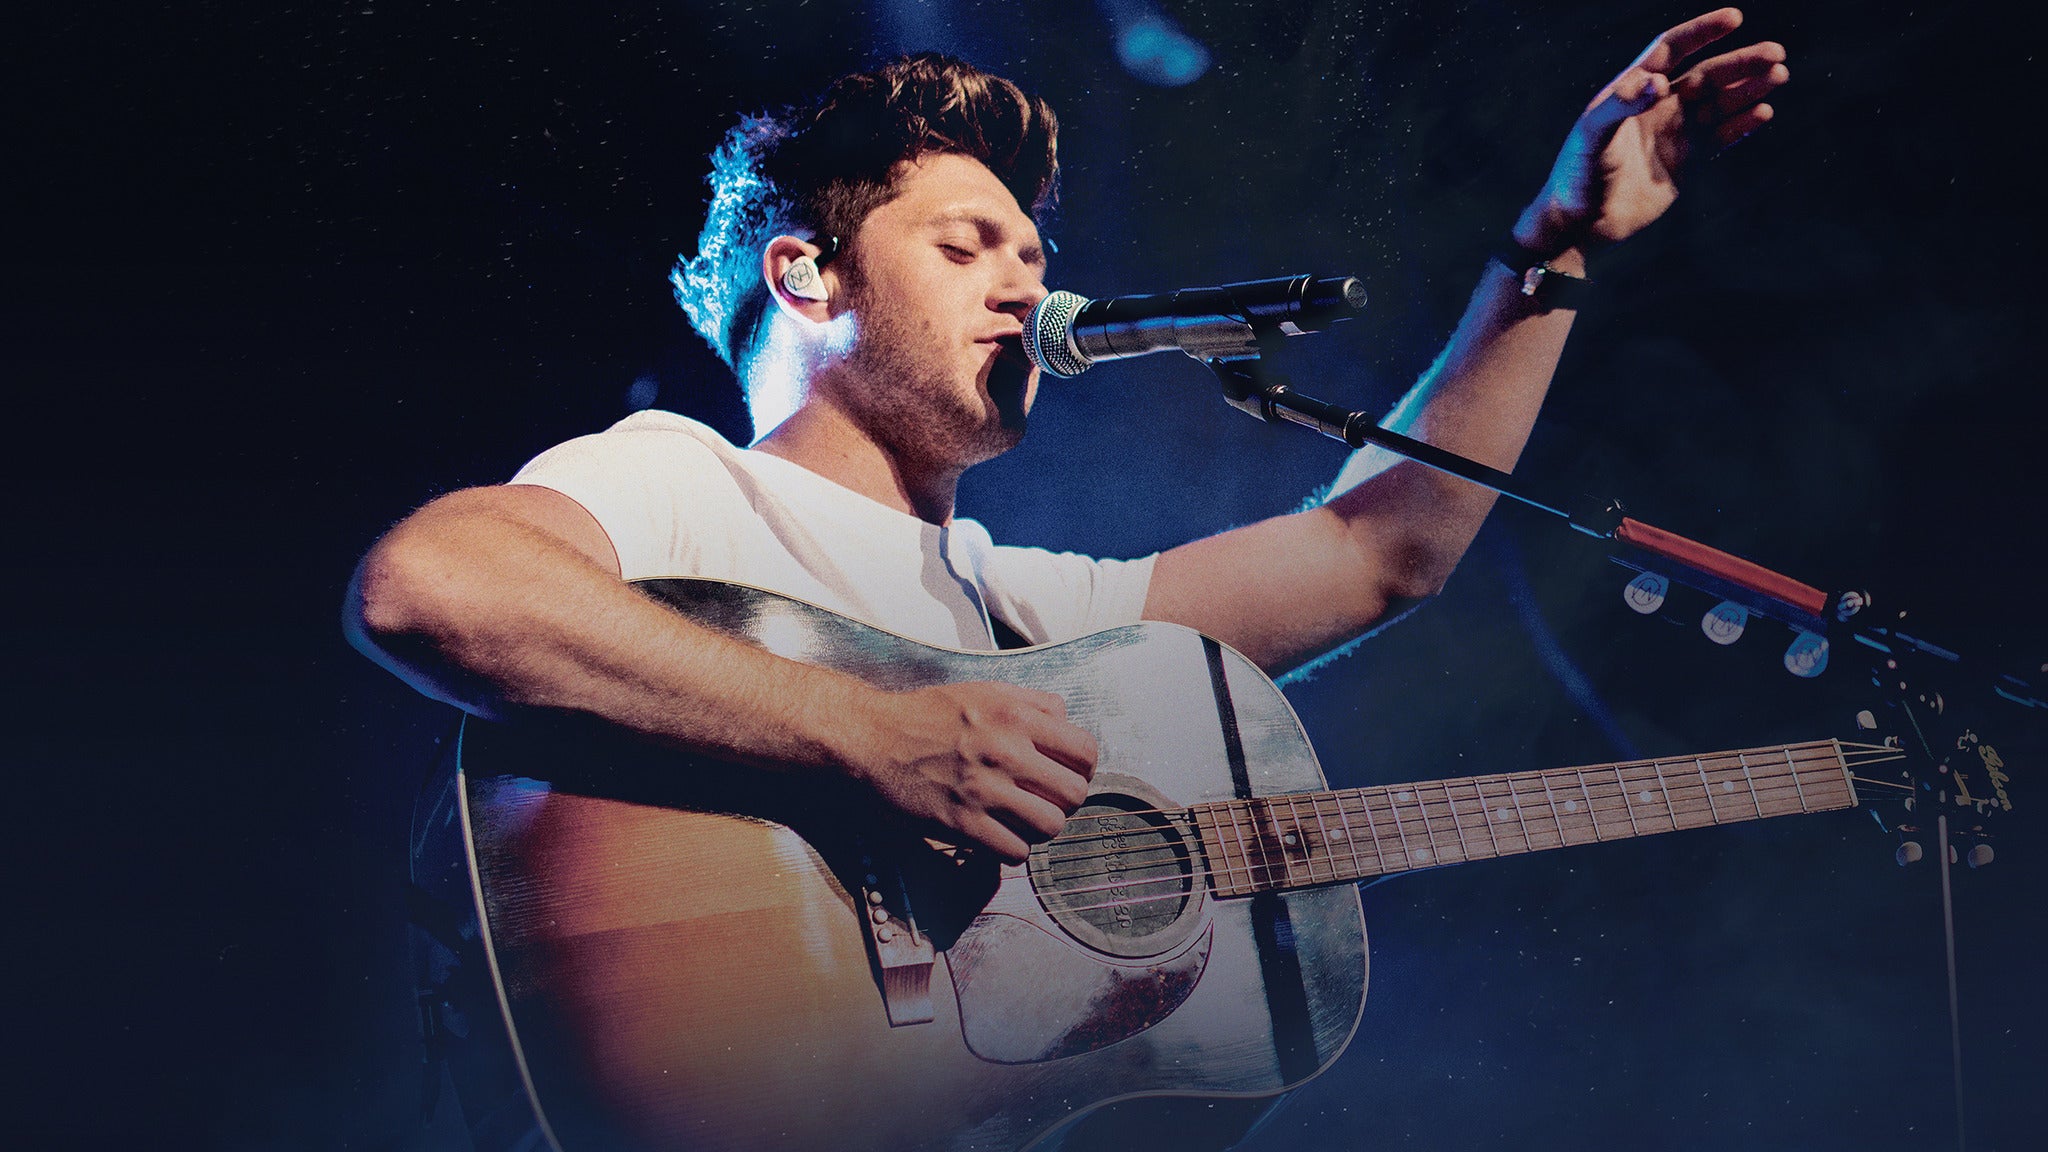 Honda Civic Tour presents Niall Horan, Nice To Meet Ya in Milwaukee  promo photo for Aisle Seating Onsale presale offer code